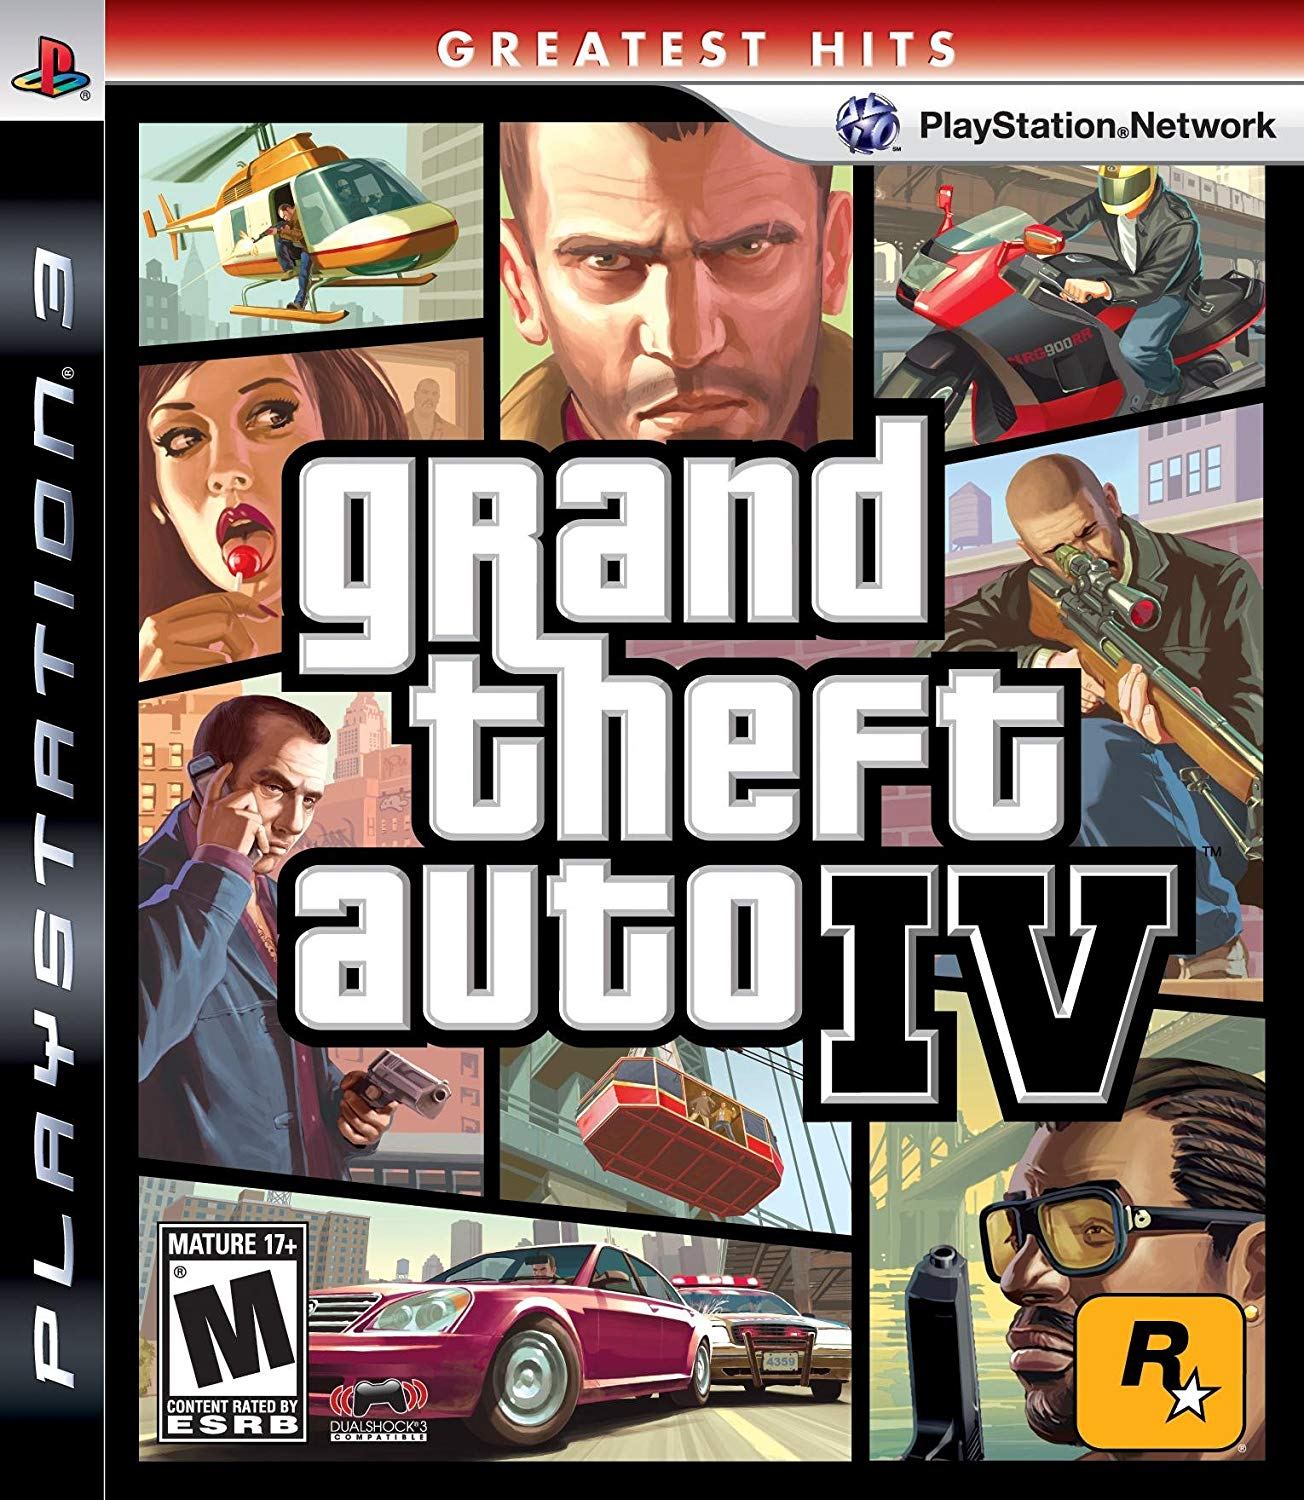 playstation 3 greatest hits